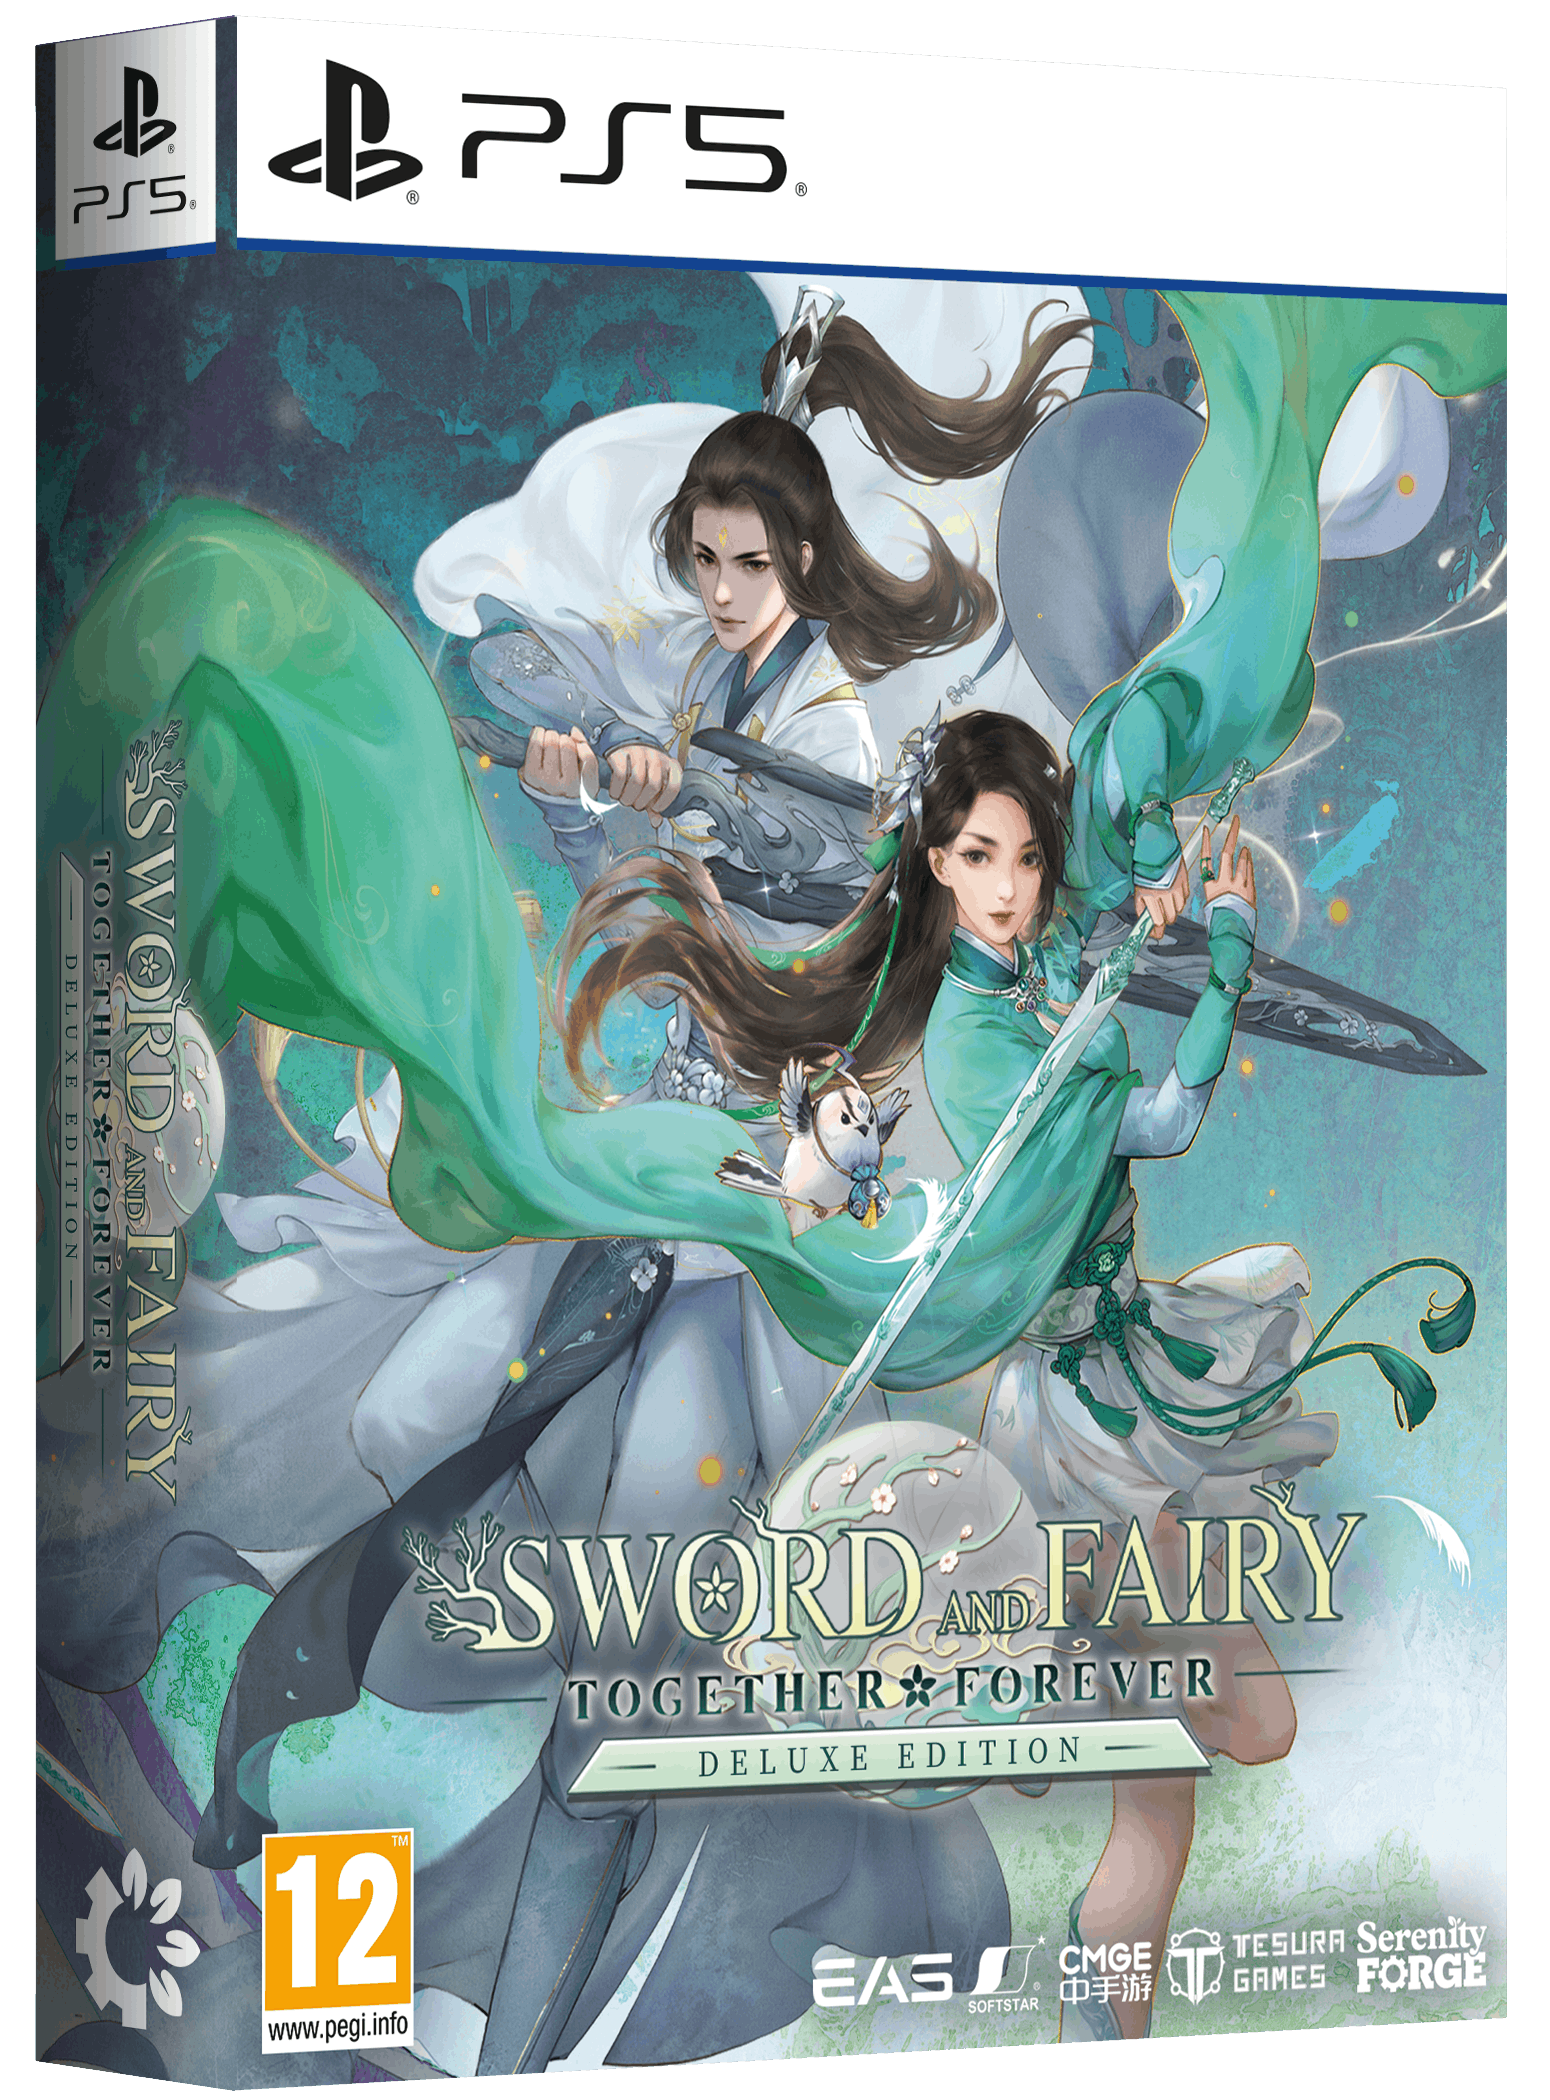 Sword and Fairy: Together Forever - Deluxe Edition (PS5), Serenity Forge